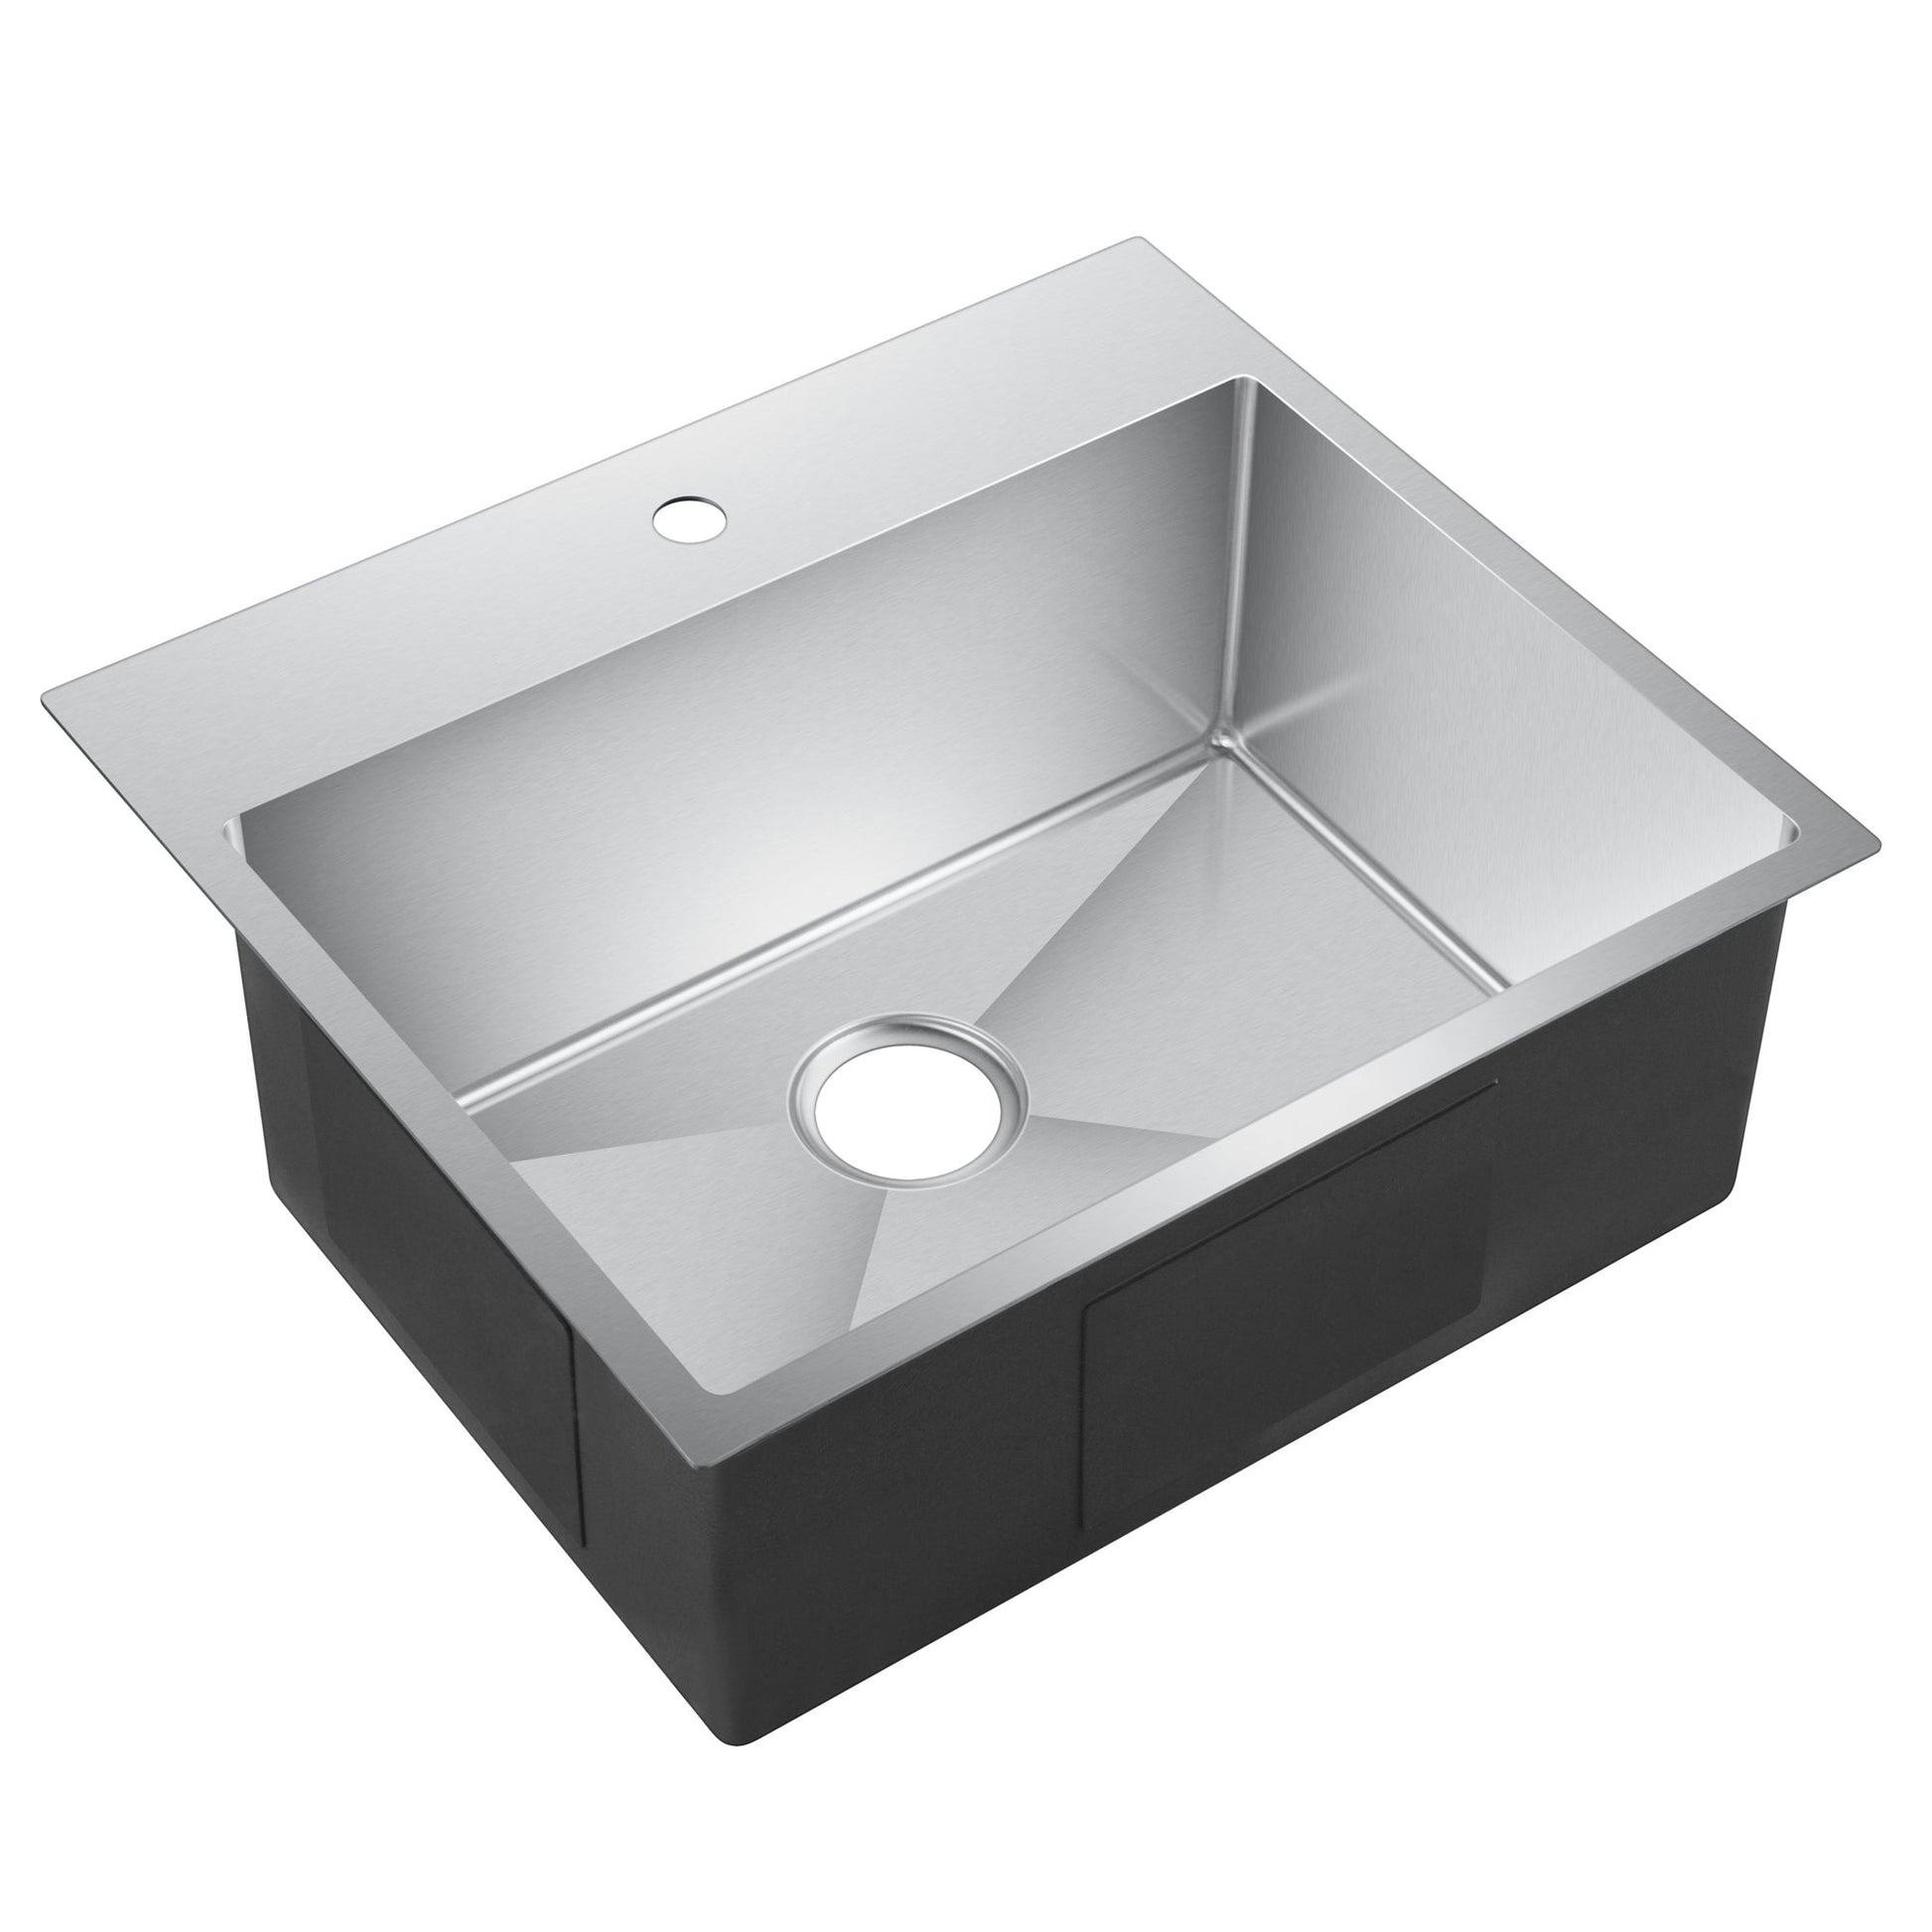 https://usbathstore.com/cdn/shop/files/Water-Creation-Small-Radius-Single-Bowl-Stainless-Steel-Hand-Made-Drop-In-25-Inch-X-22-Inch-Sink-With-Drain-Strainer-And-Bottom-Grid-4.jpg?v=1693618218&width=1946